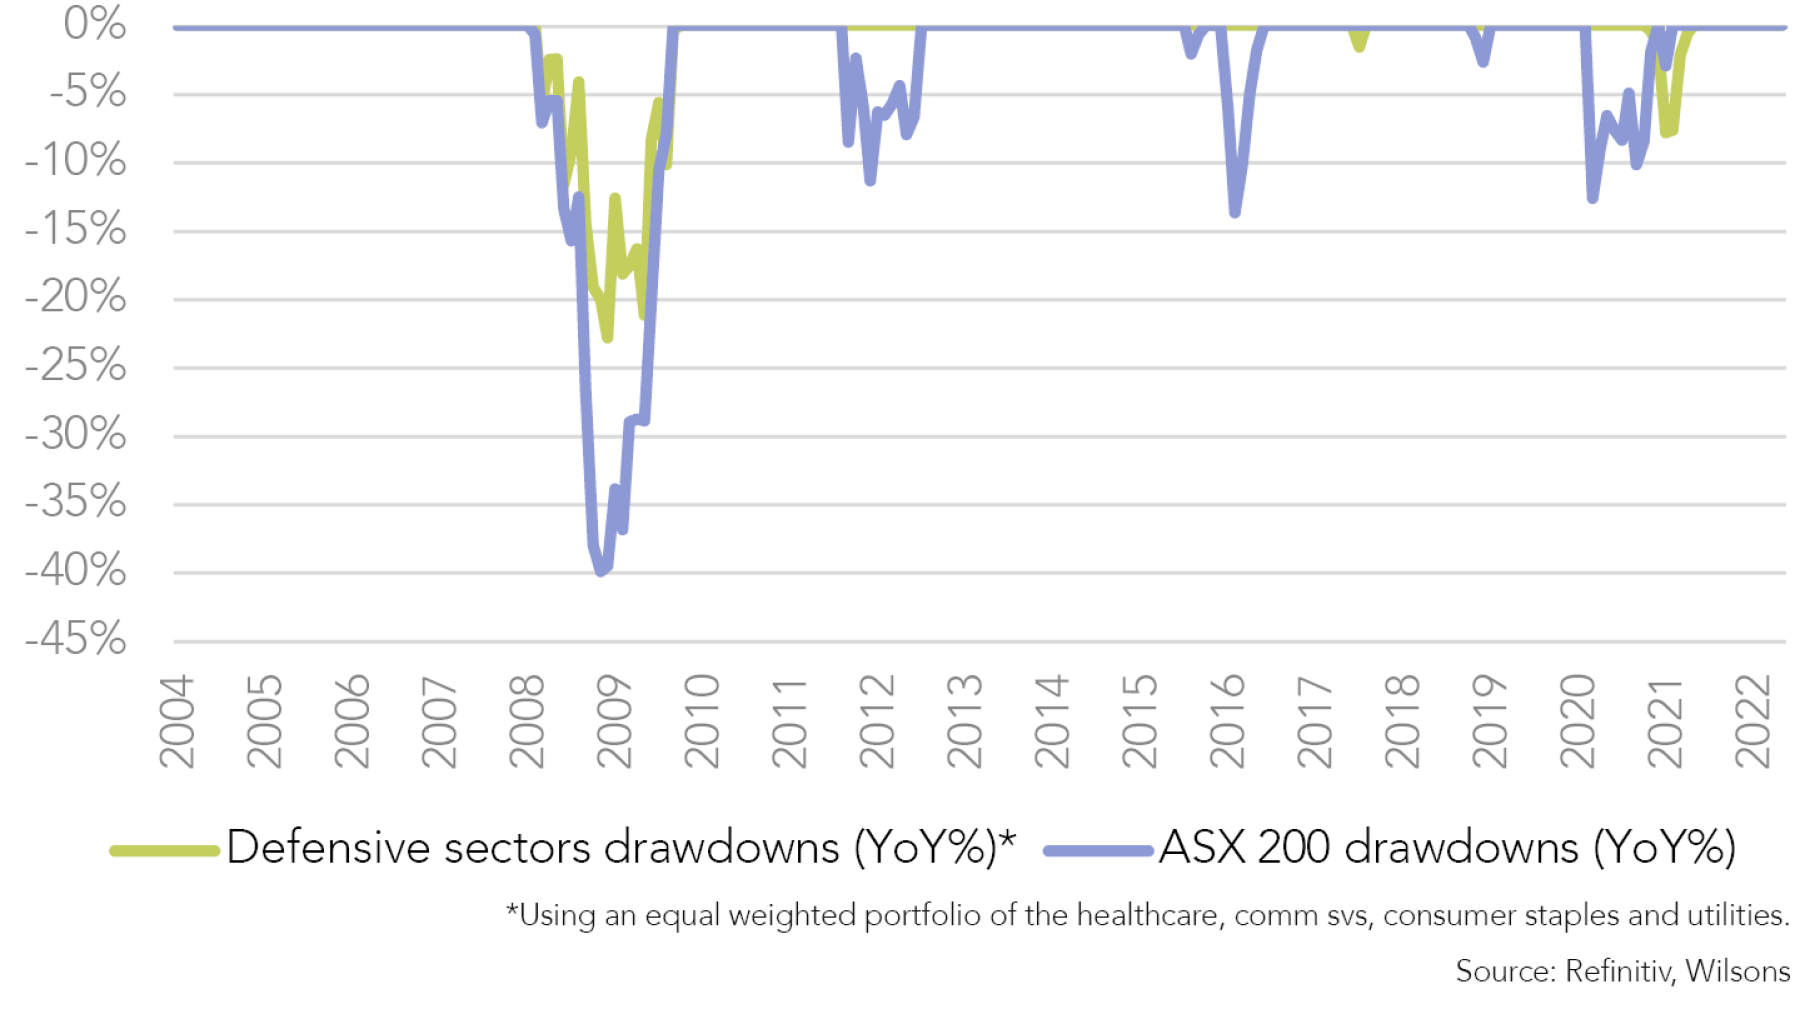 Figure 3: Defensive sectors have tended to have lower drawdowns than the market